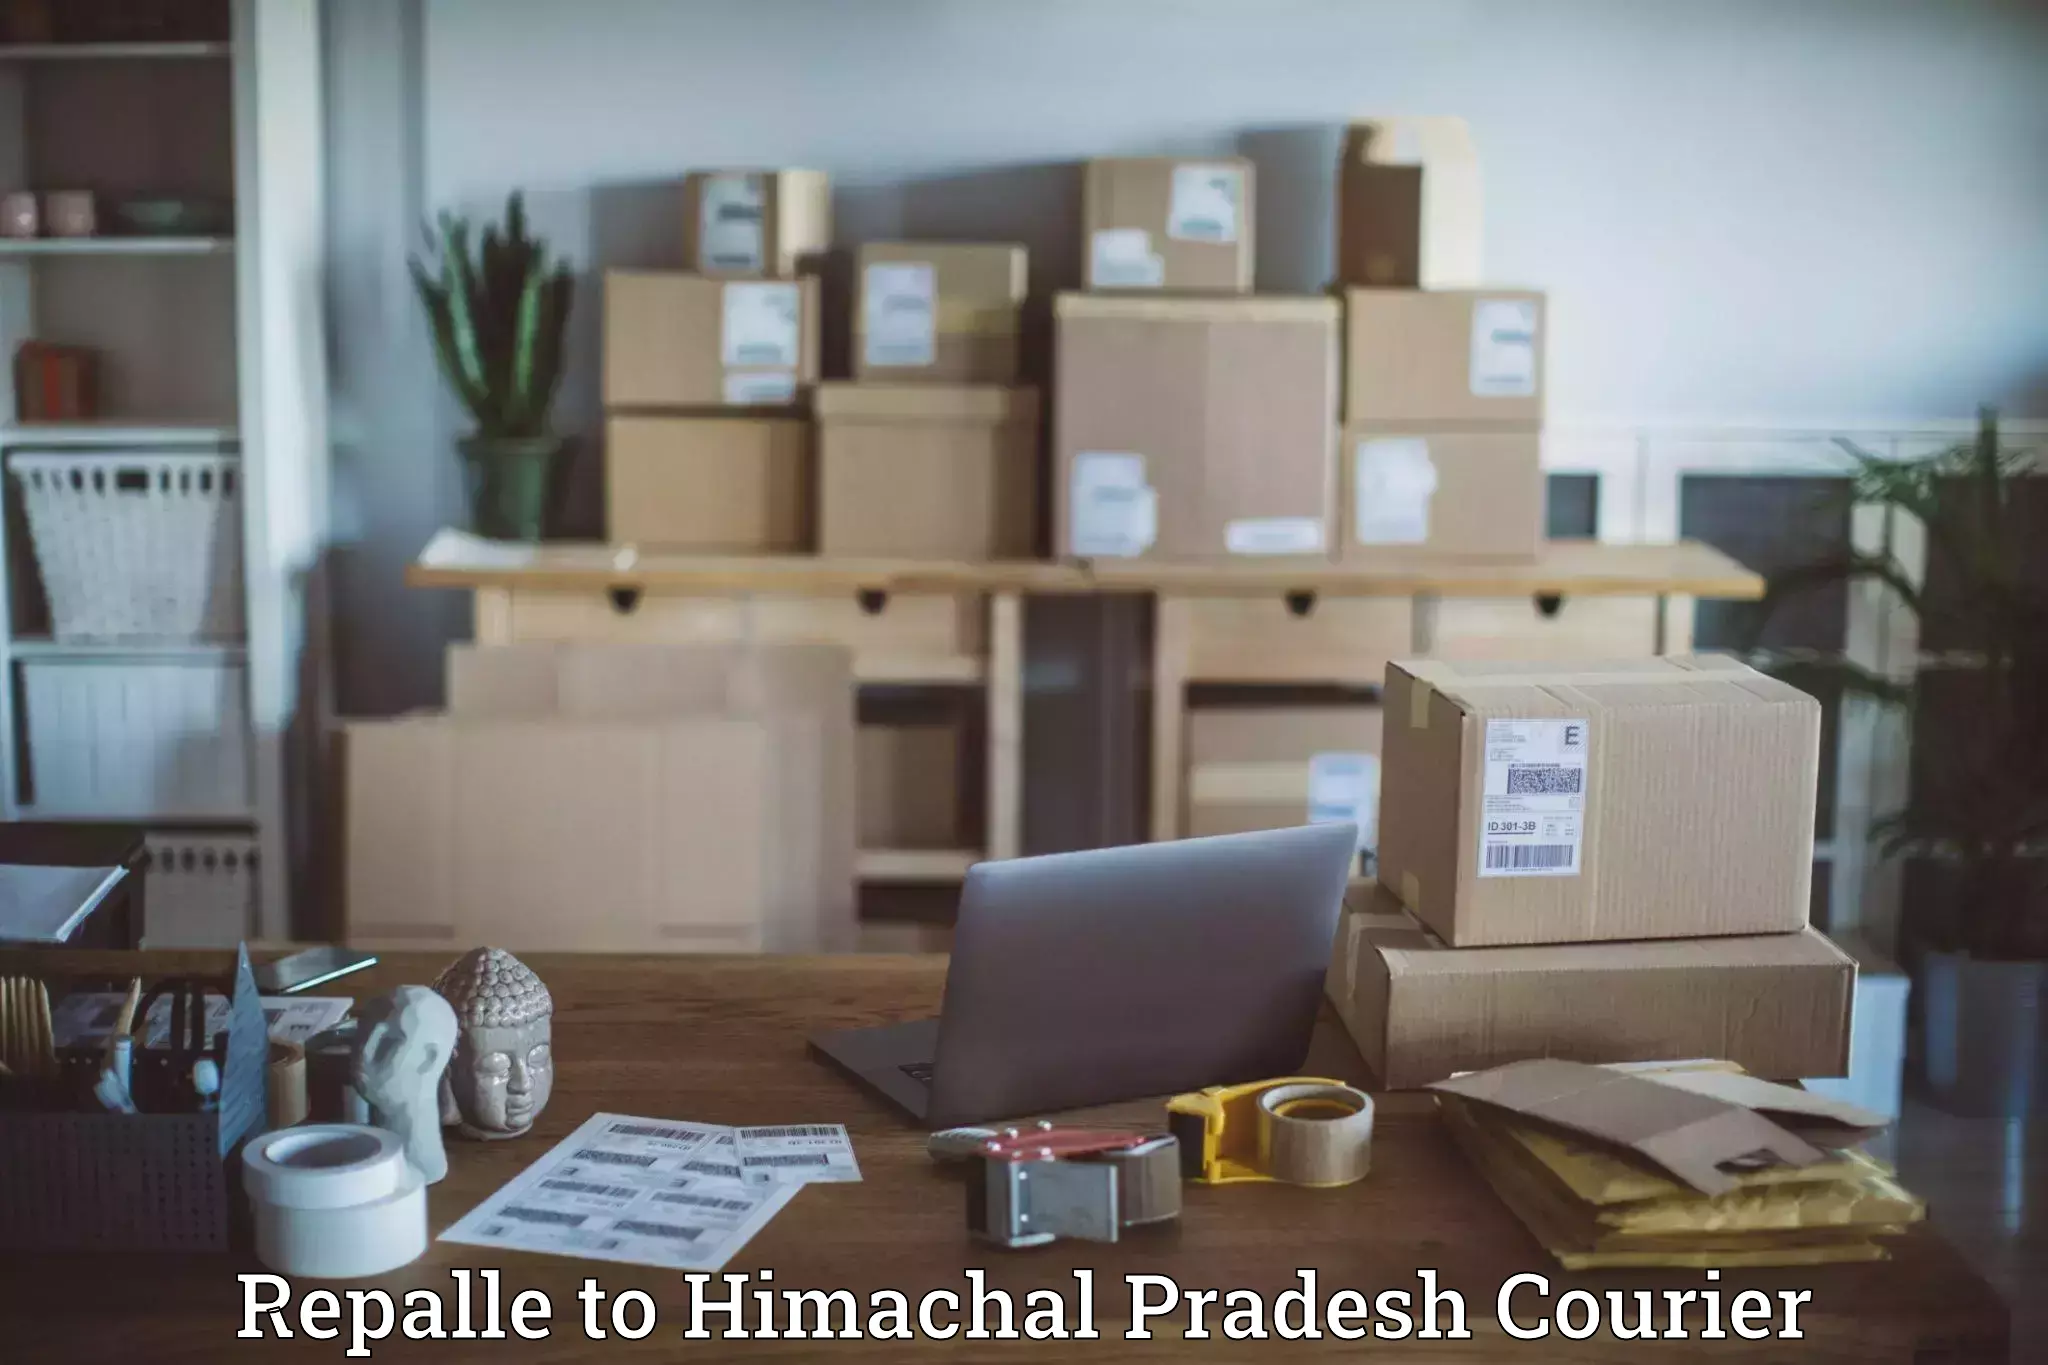 High-capacity courier solutions Repalle to Himachal Pradesh